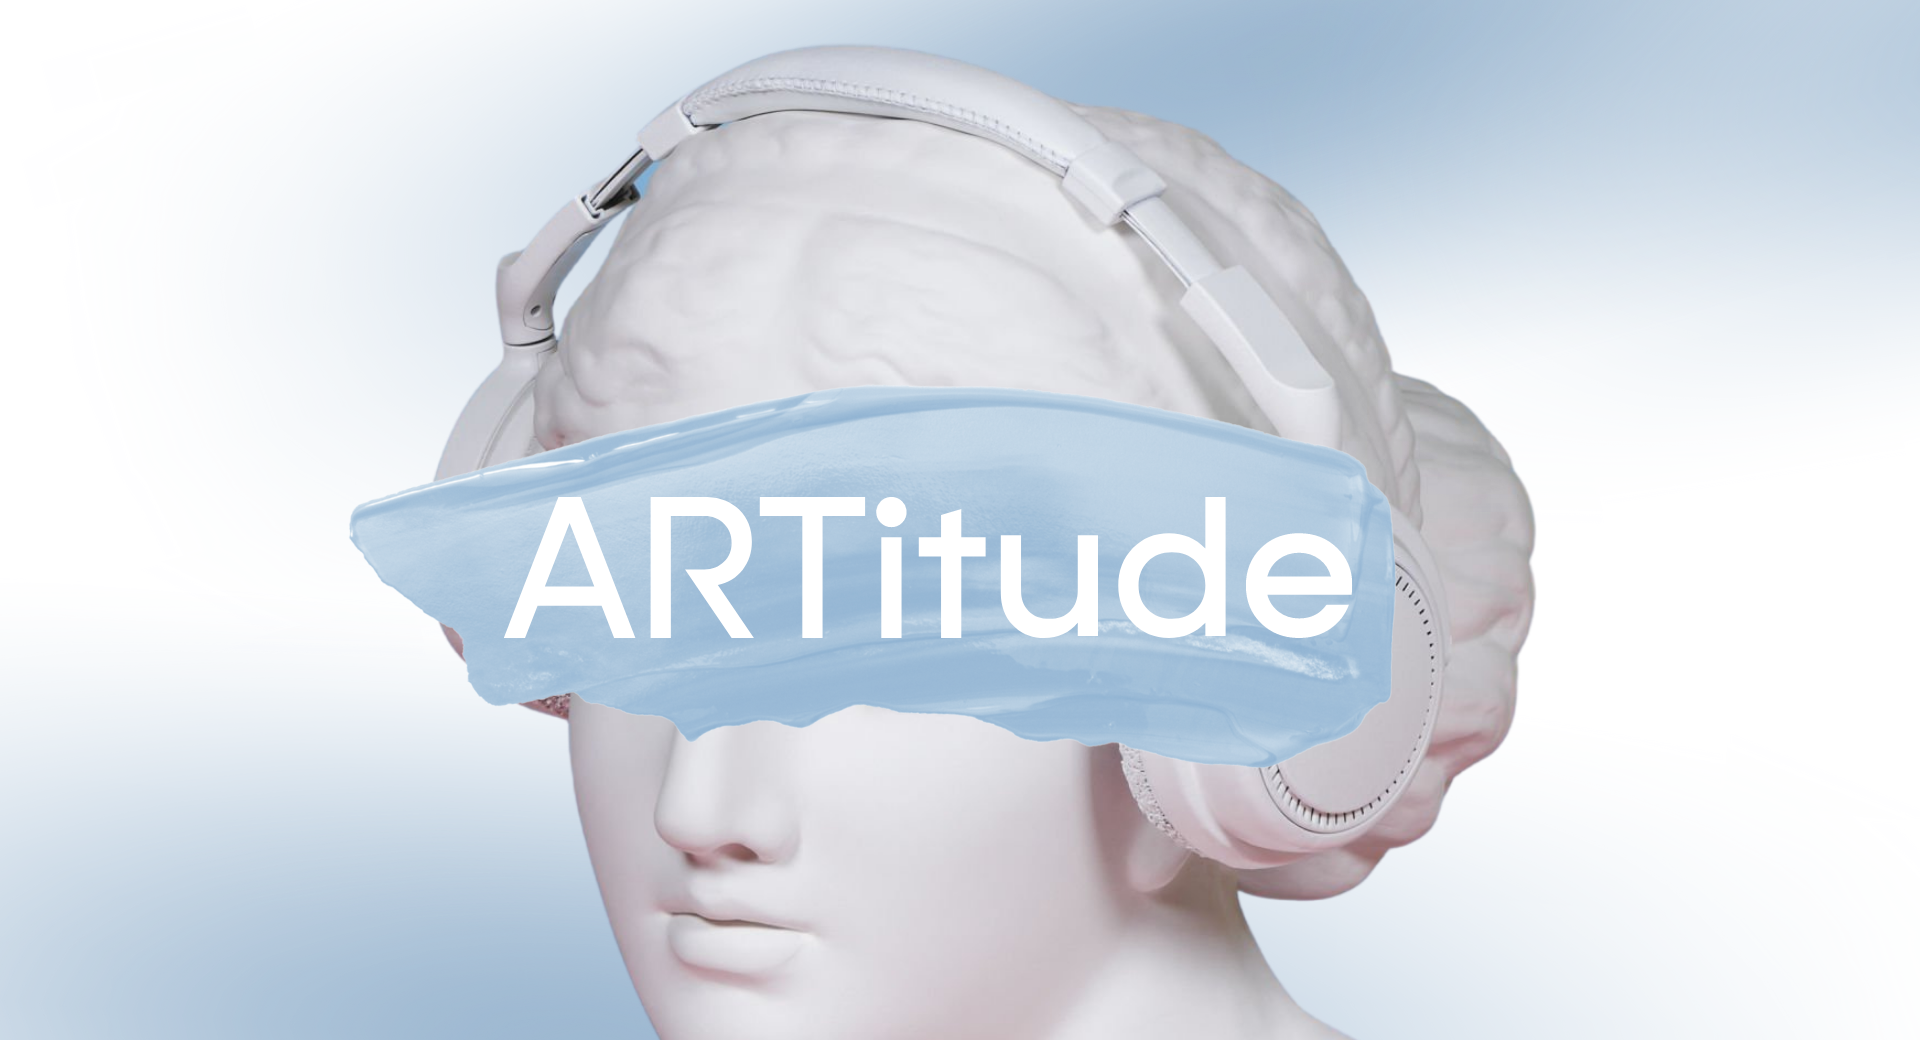 ARTitude. Art peice, artists and 3d virtual reality gallery (VR), augmented reality (AR) artwork product selling platform.